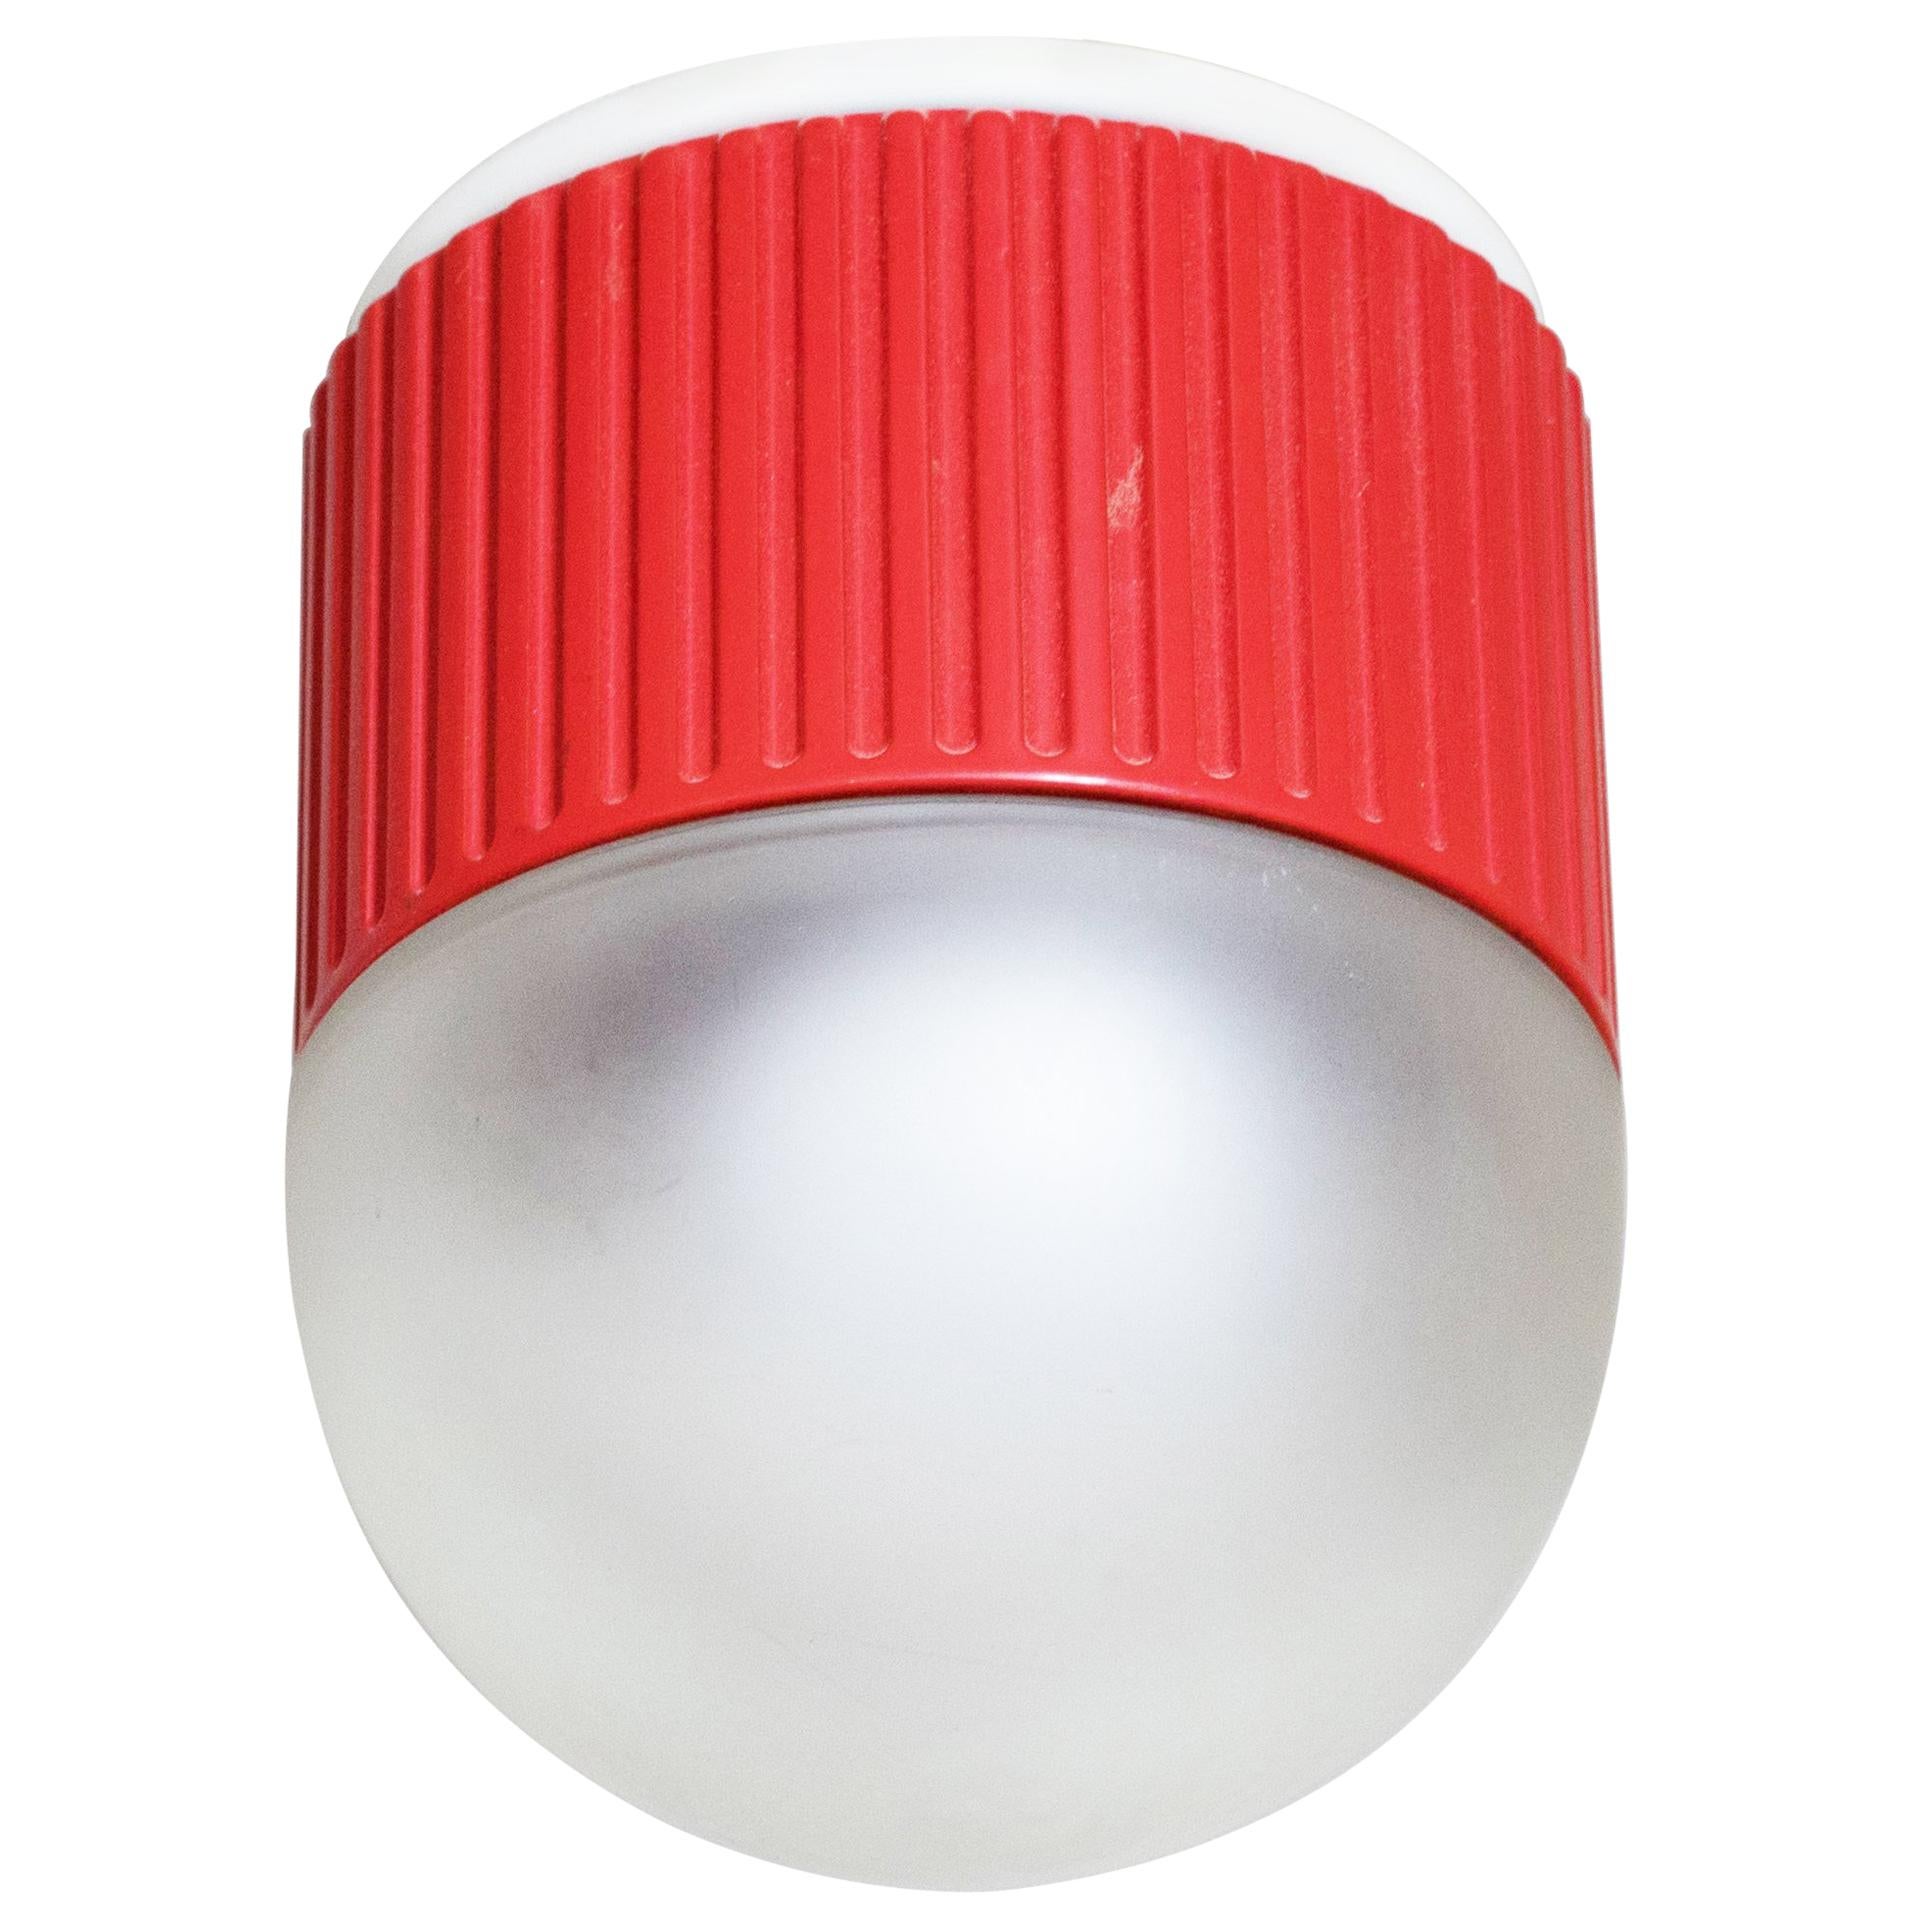 Bulbo Sconce and Flush Mount in Red by Barbieri & Marianelli for Tronconi